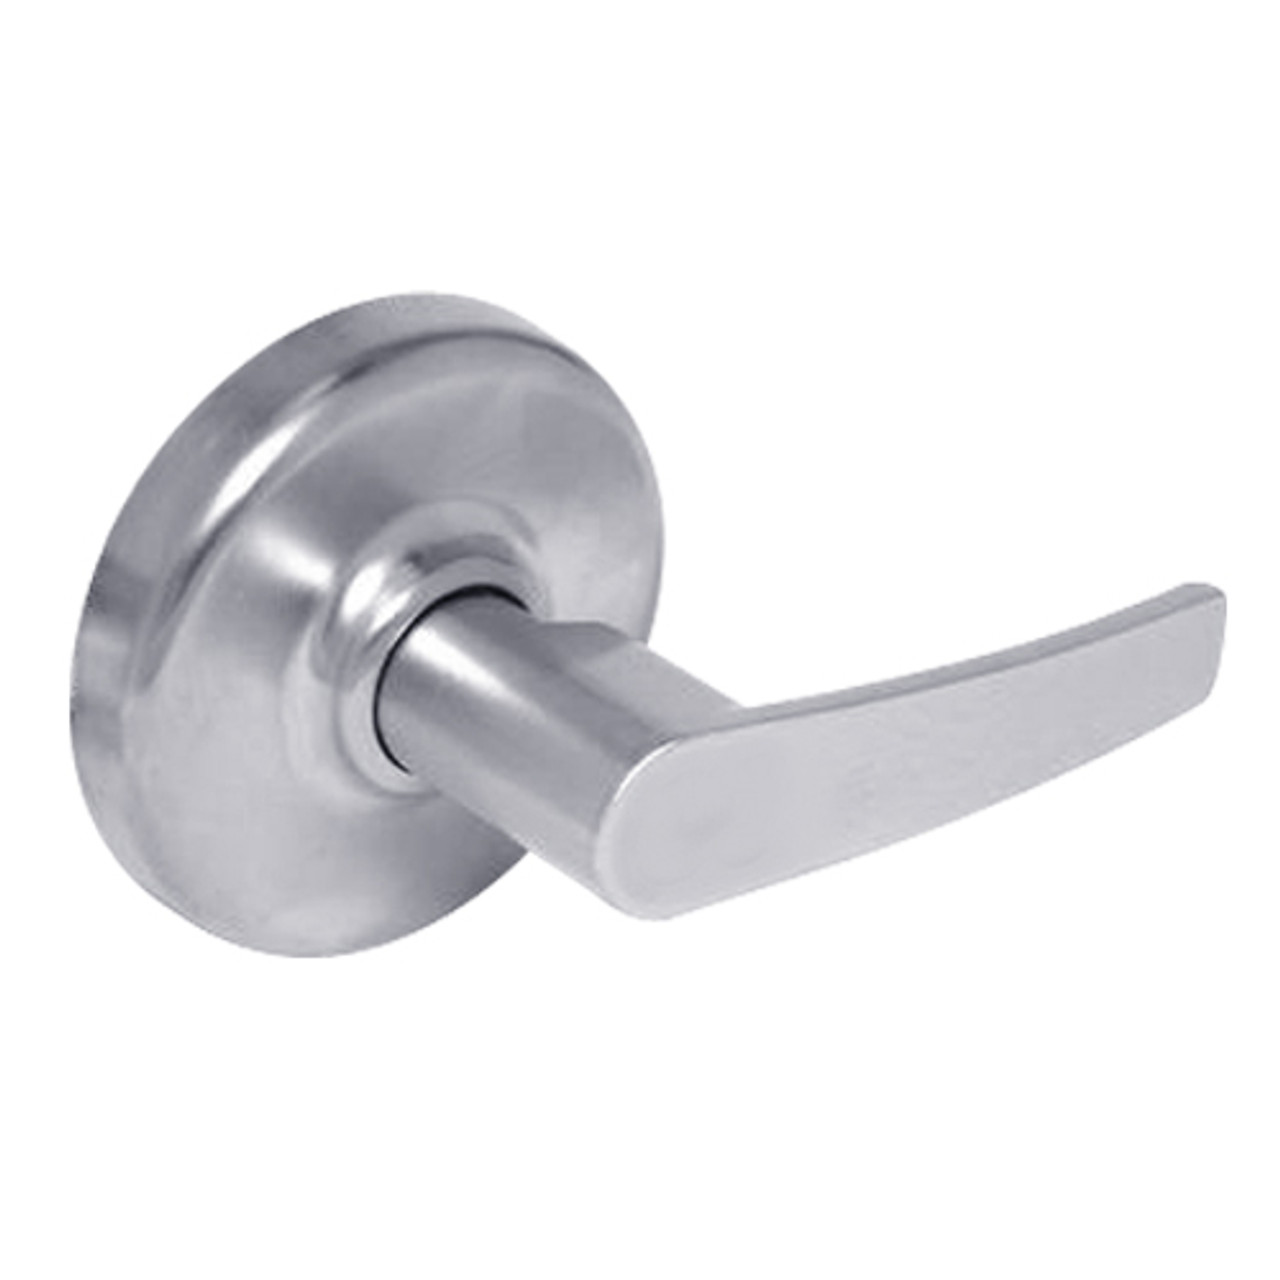 CL3390-AZD-626 Corbin CL3300 Series Extra Heavy Duty Passage with Turnpiece Cylindrical Locksets with Armstrong Lever in Satin Chrome Finish